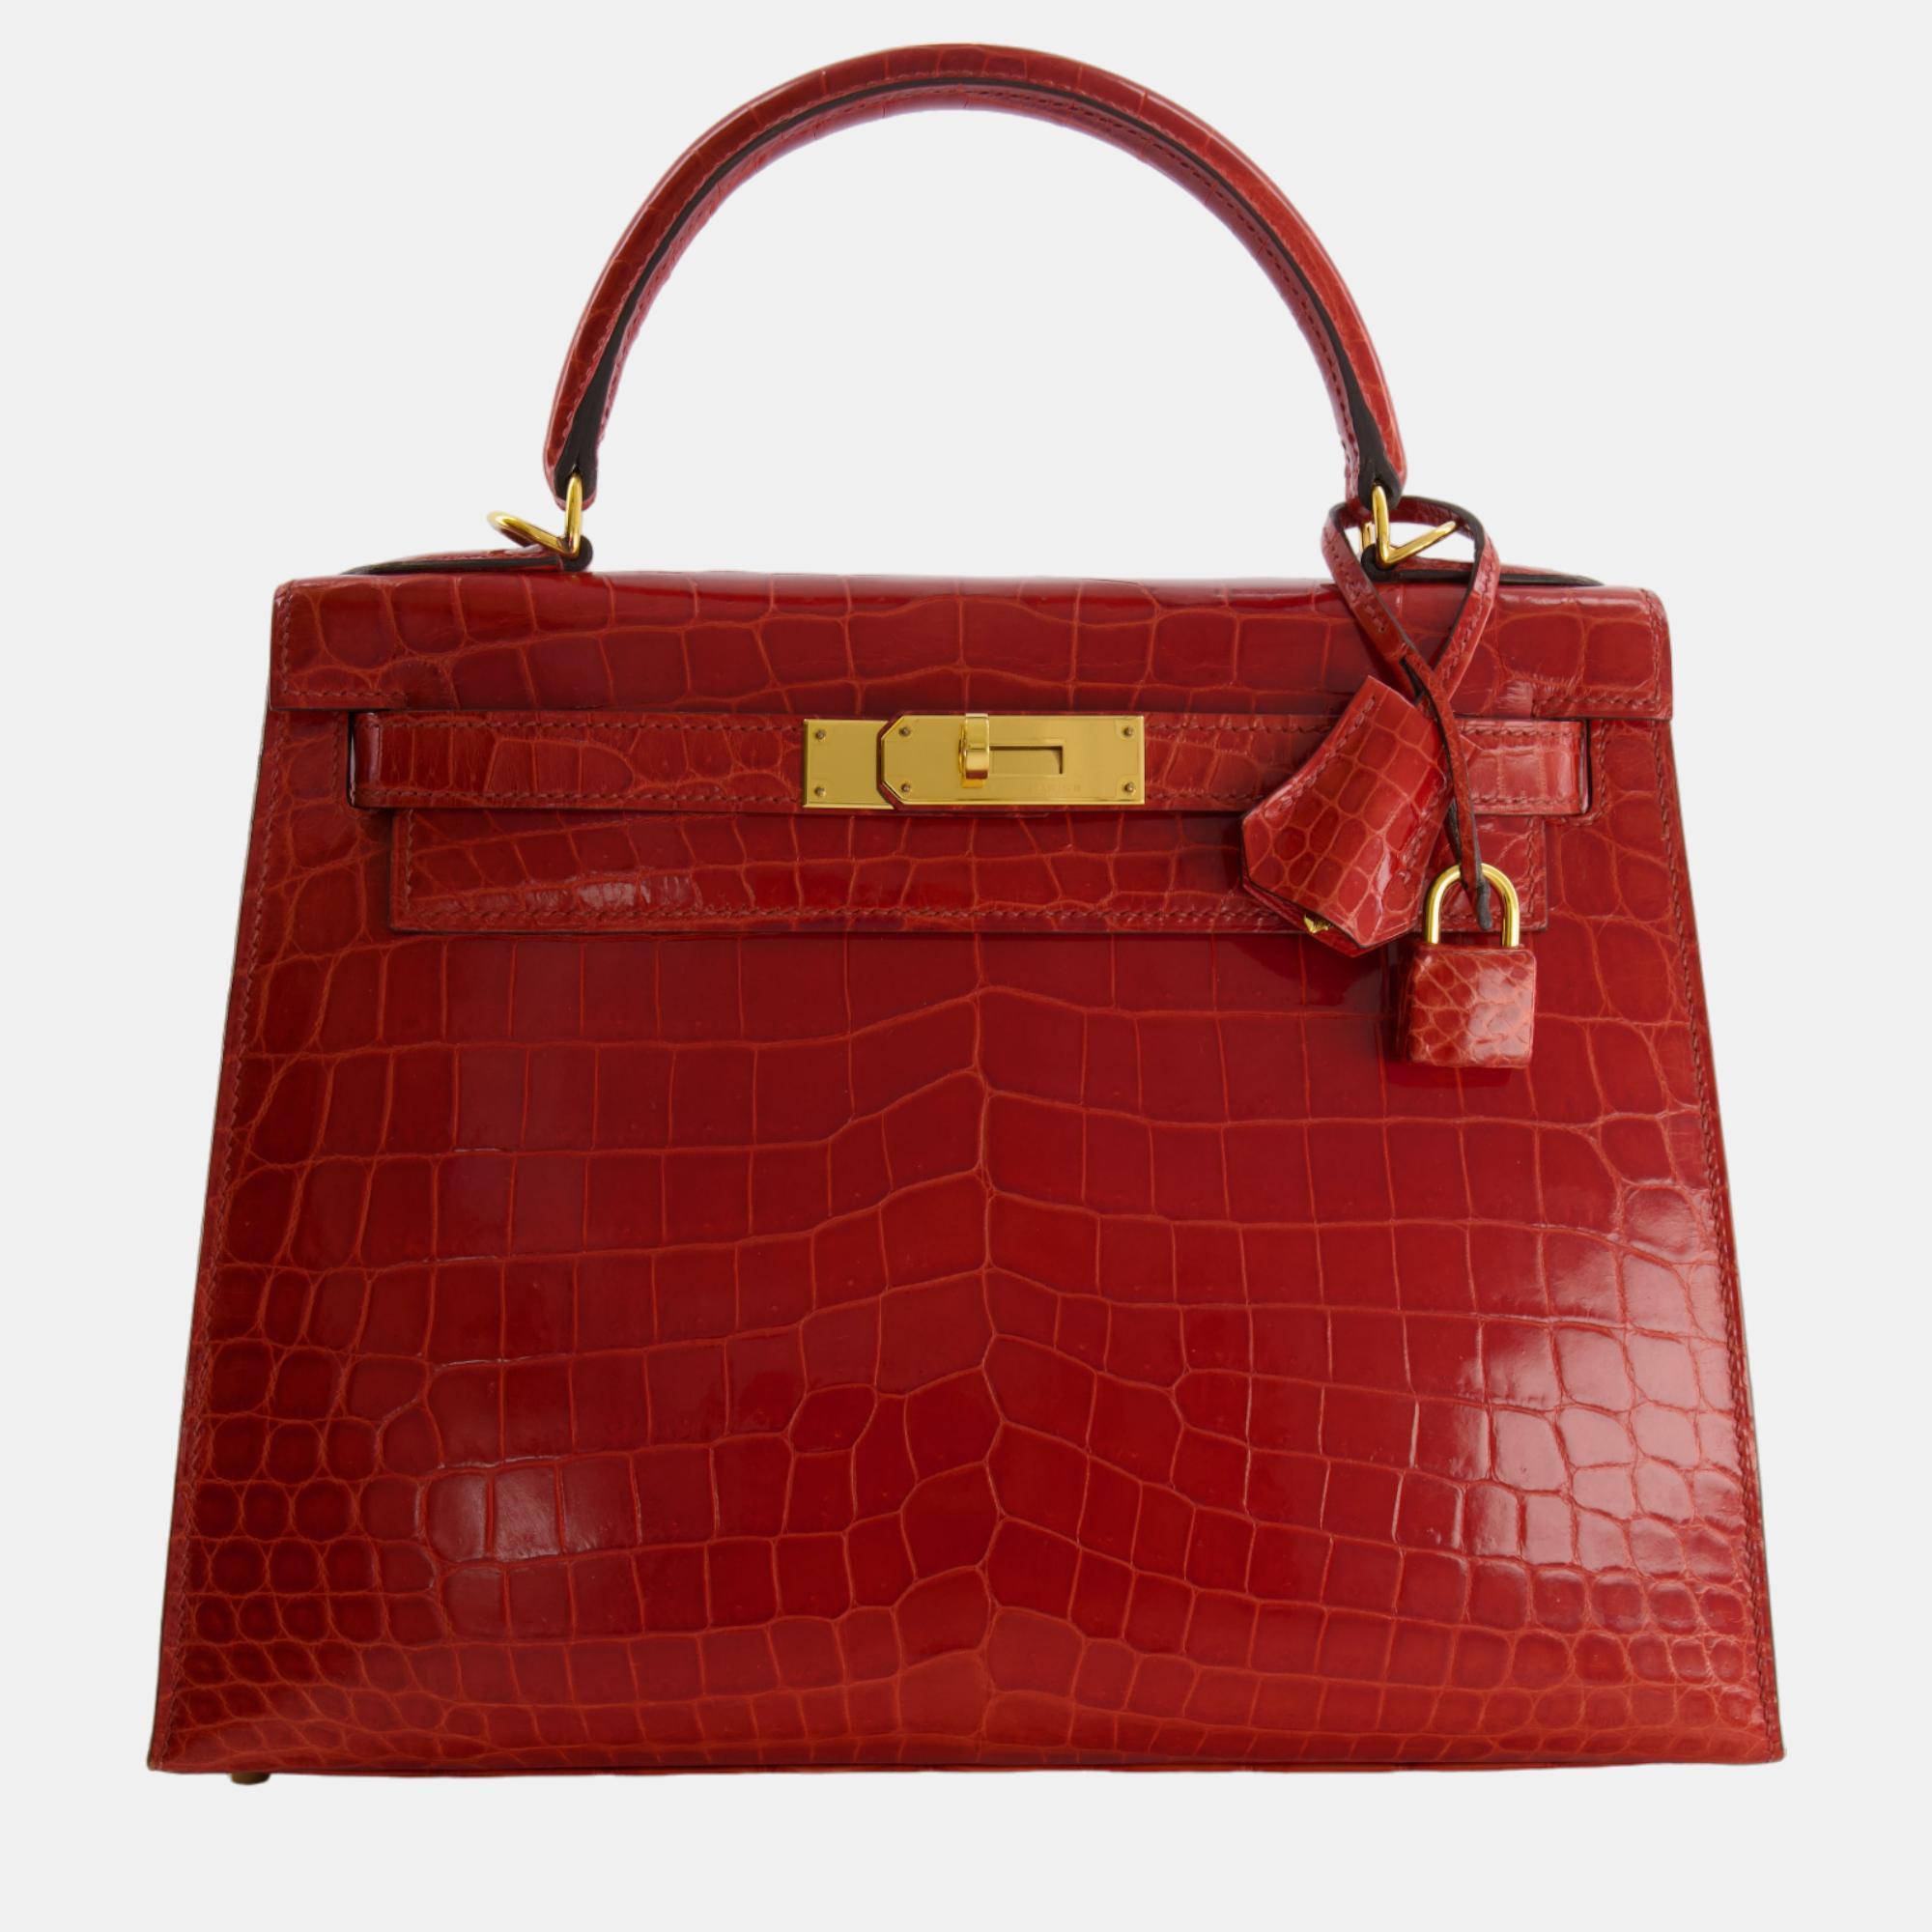 Hermes kelly bag 28cm in sanguine crocodile niloticus leather with gold hardware